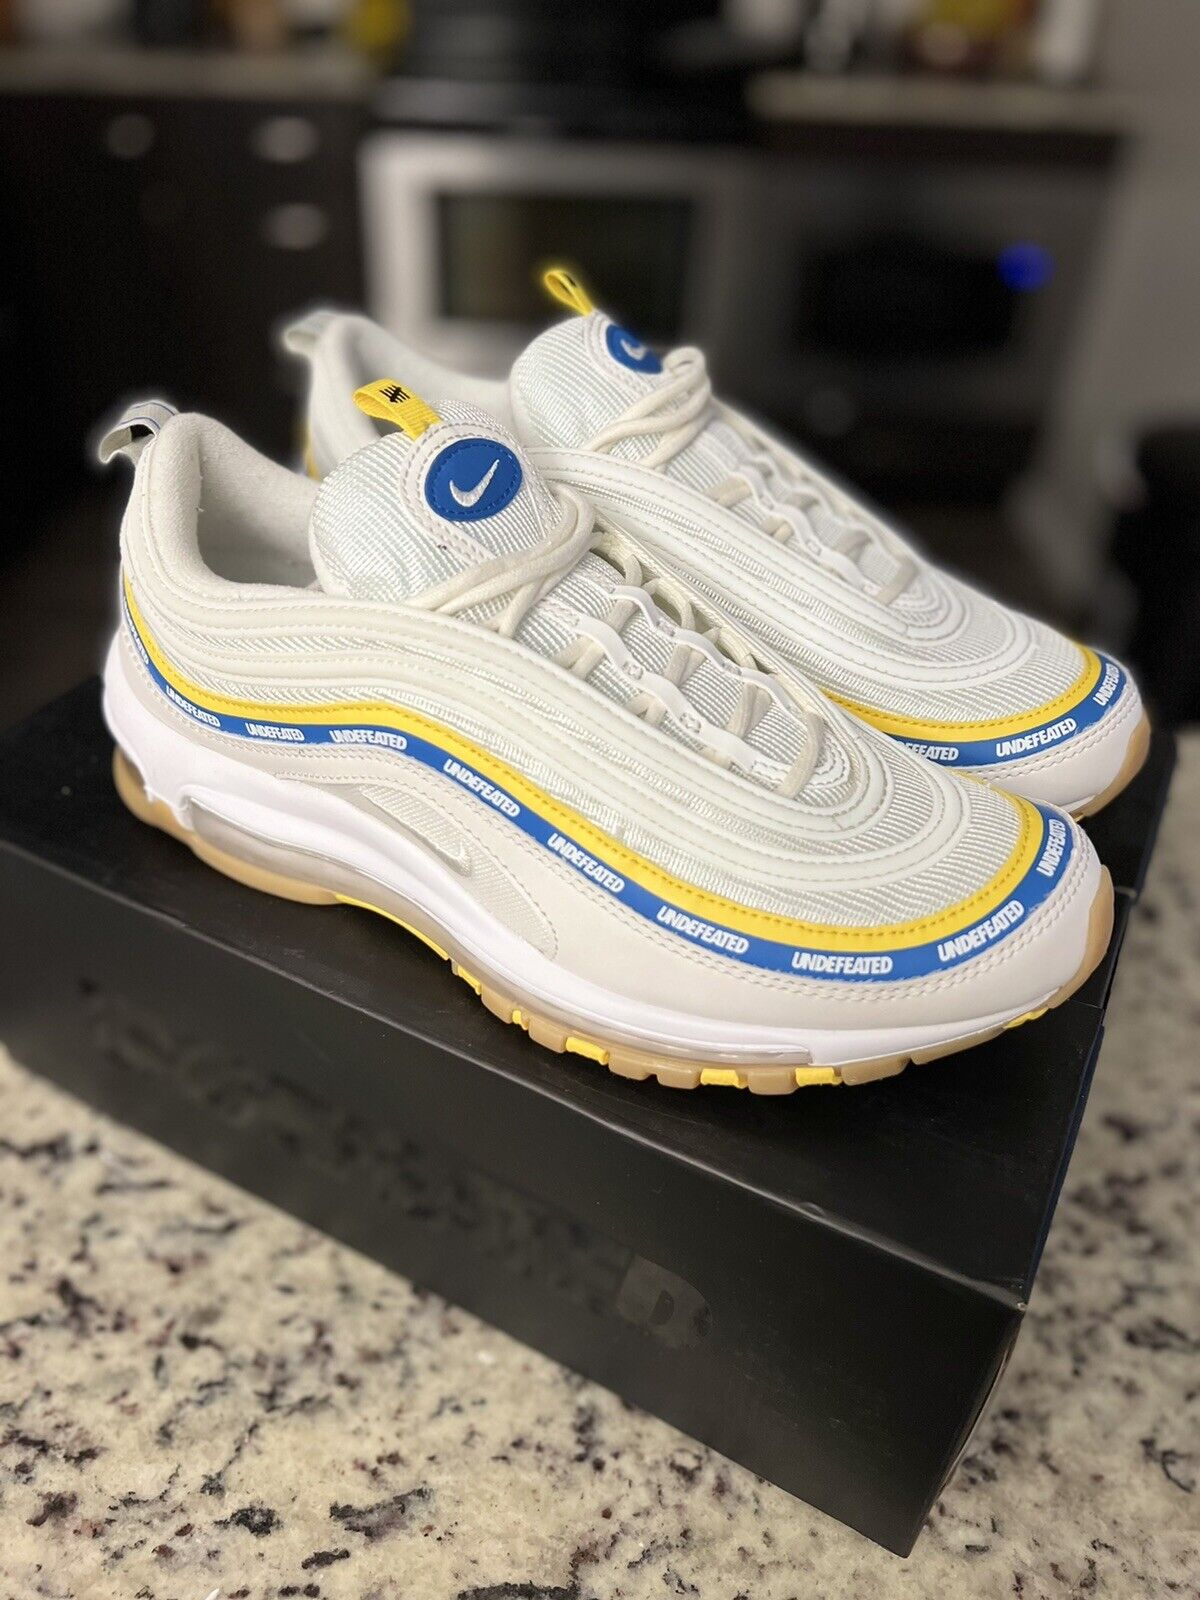 Modales deslealtad Descendencia Size 8.5 - Nike Air Max 97 x Undefeated UCLA Bruins 2021 | eBay